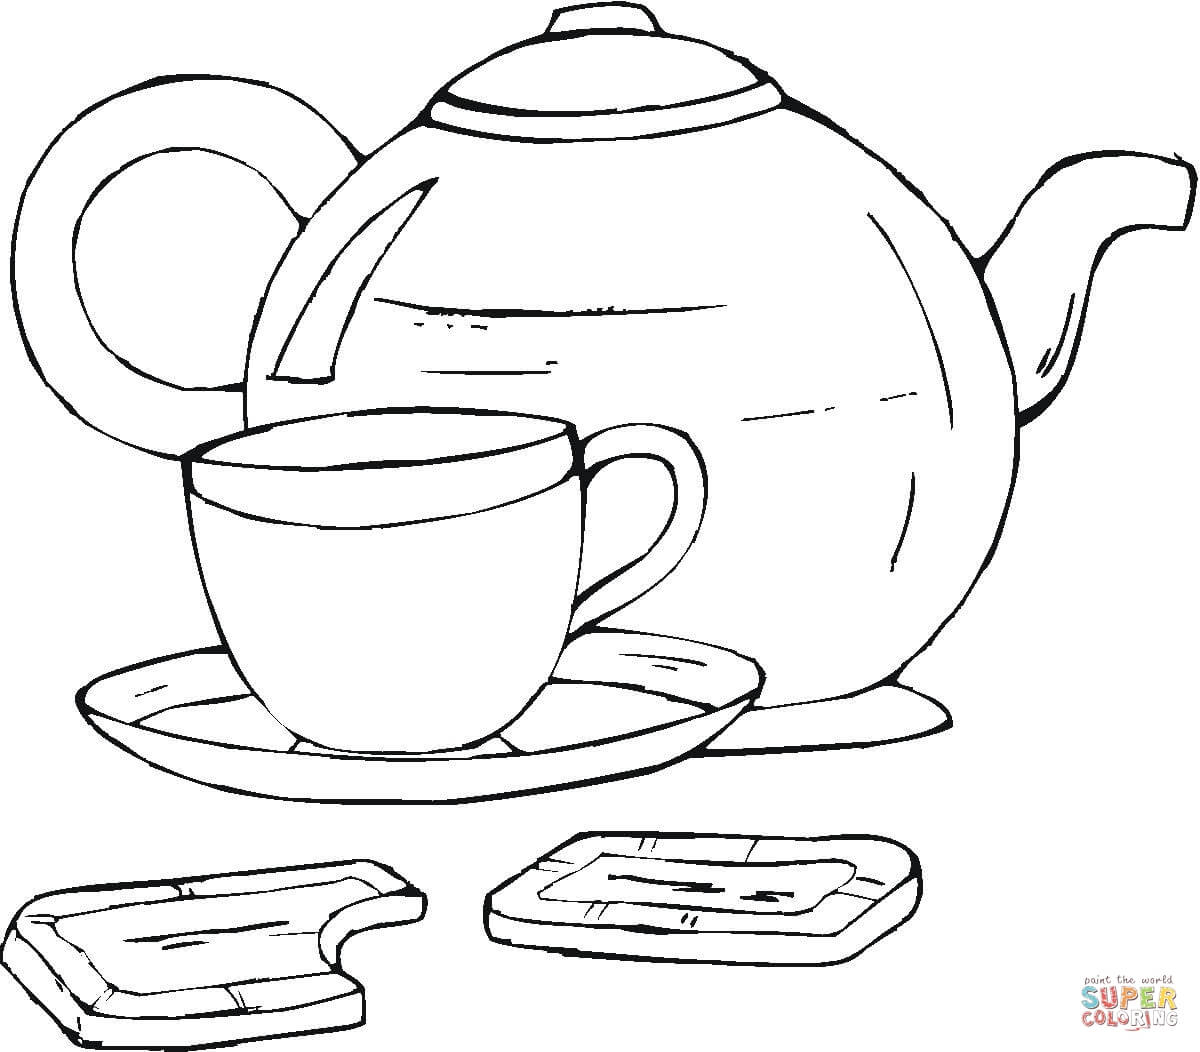 Tea Cup Coloring Page | Free Printable Coloring Pages - Free Printable Tea Cup Coloring Pages